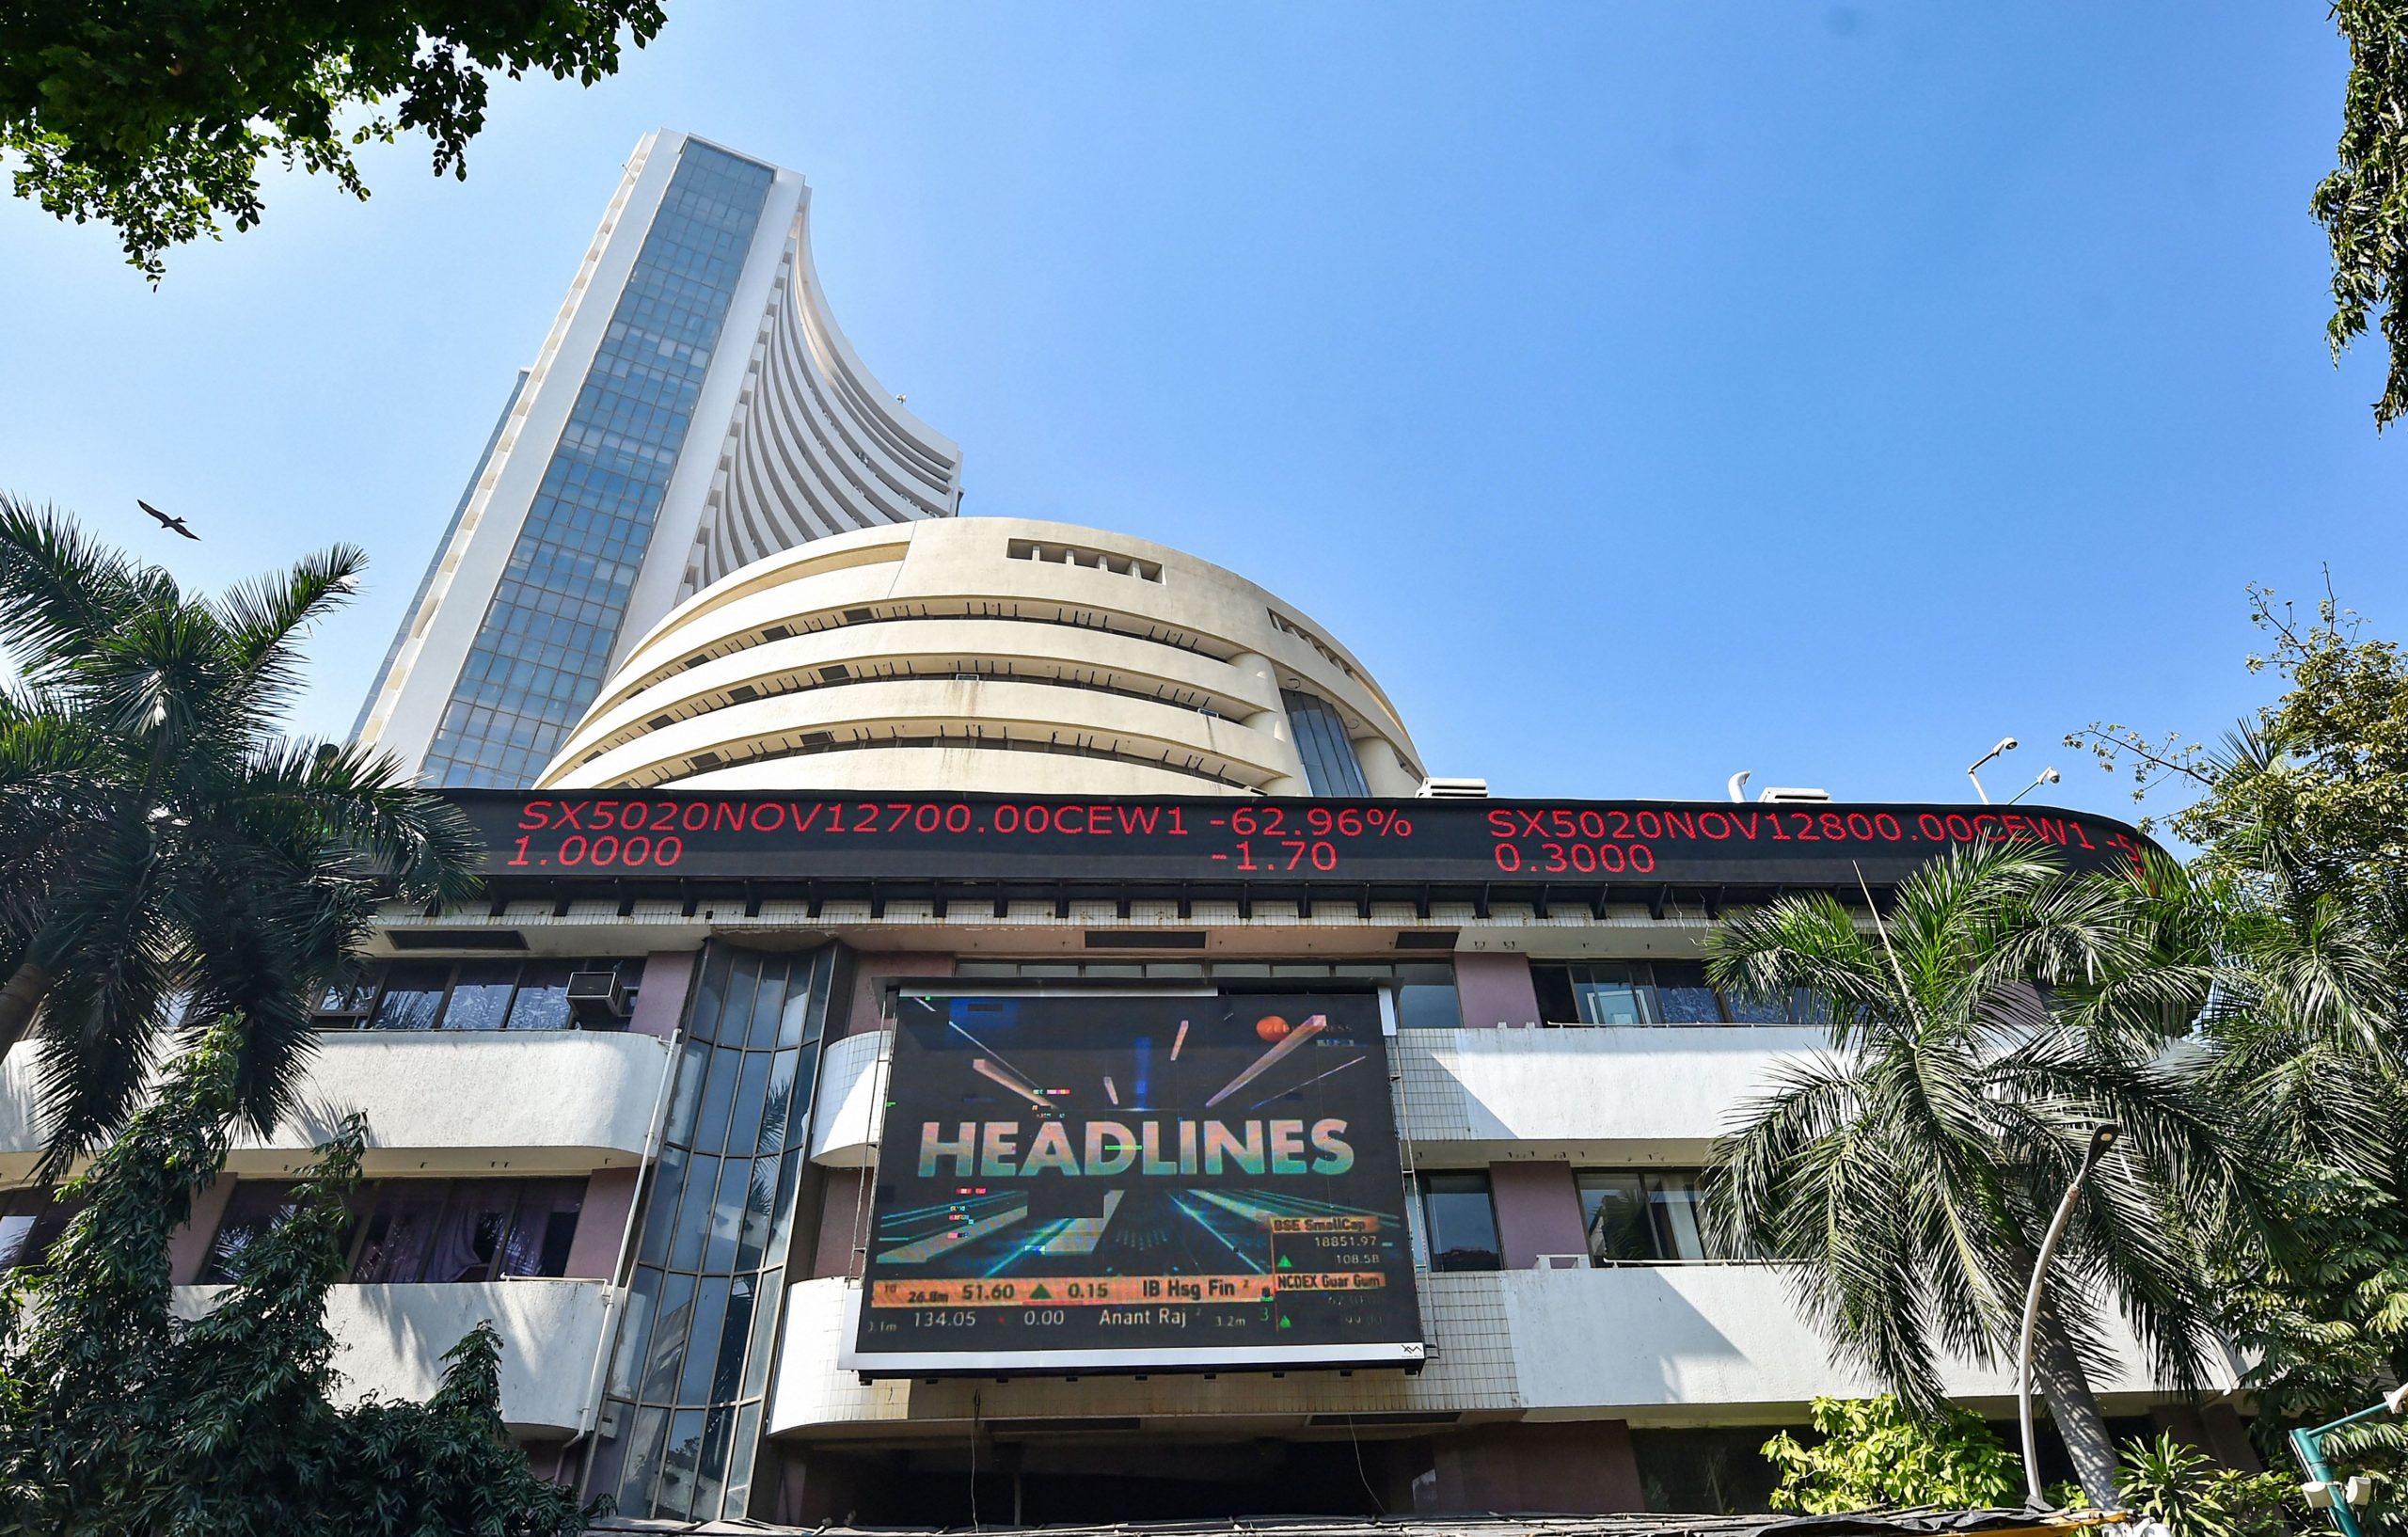 Trending Stocks: Airtel, PNB Housing, JSL, KPTL and others in news today